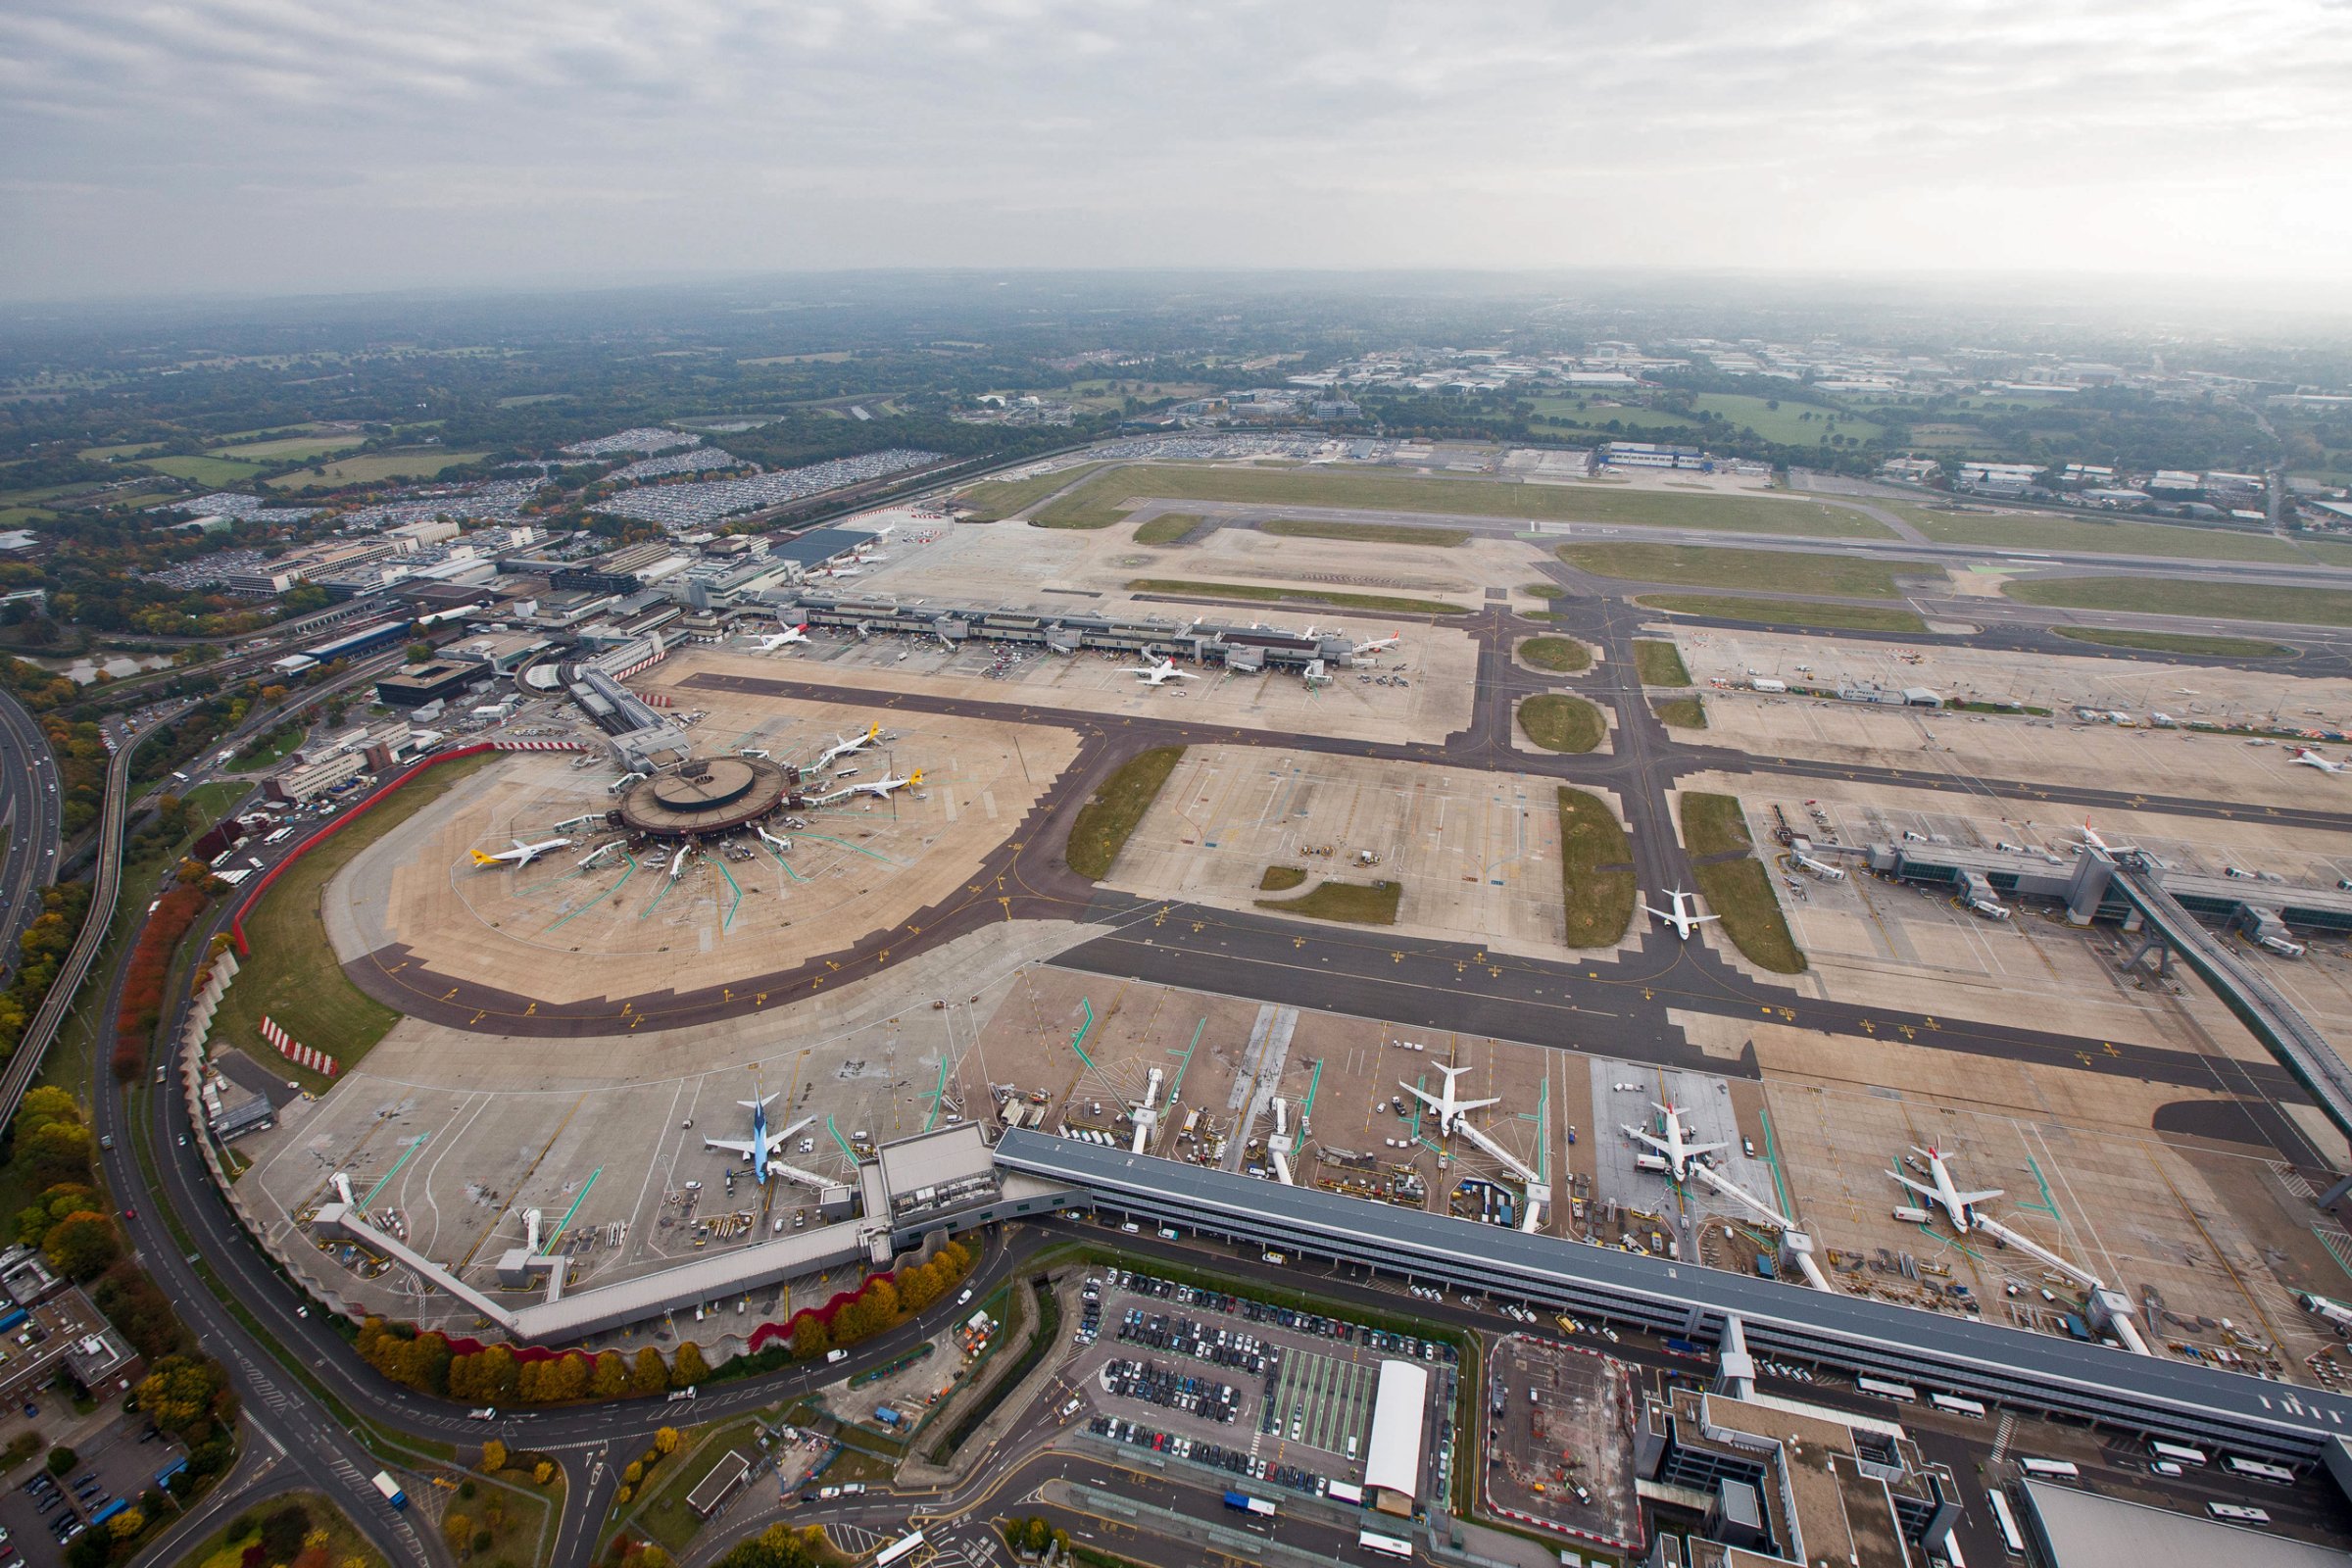 London Gatwick Airport Aerials Ahead Of Government Decision On London Airport Expansion